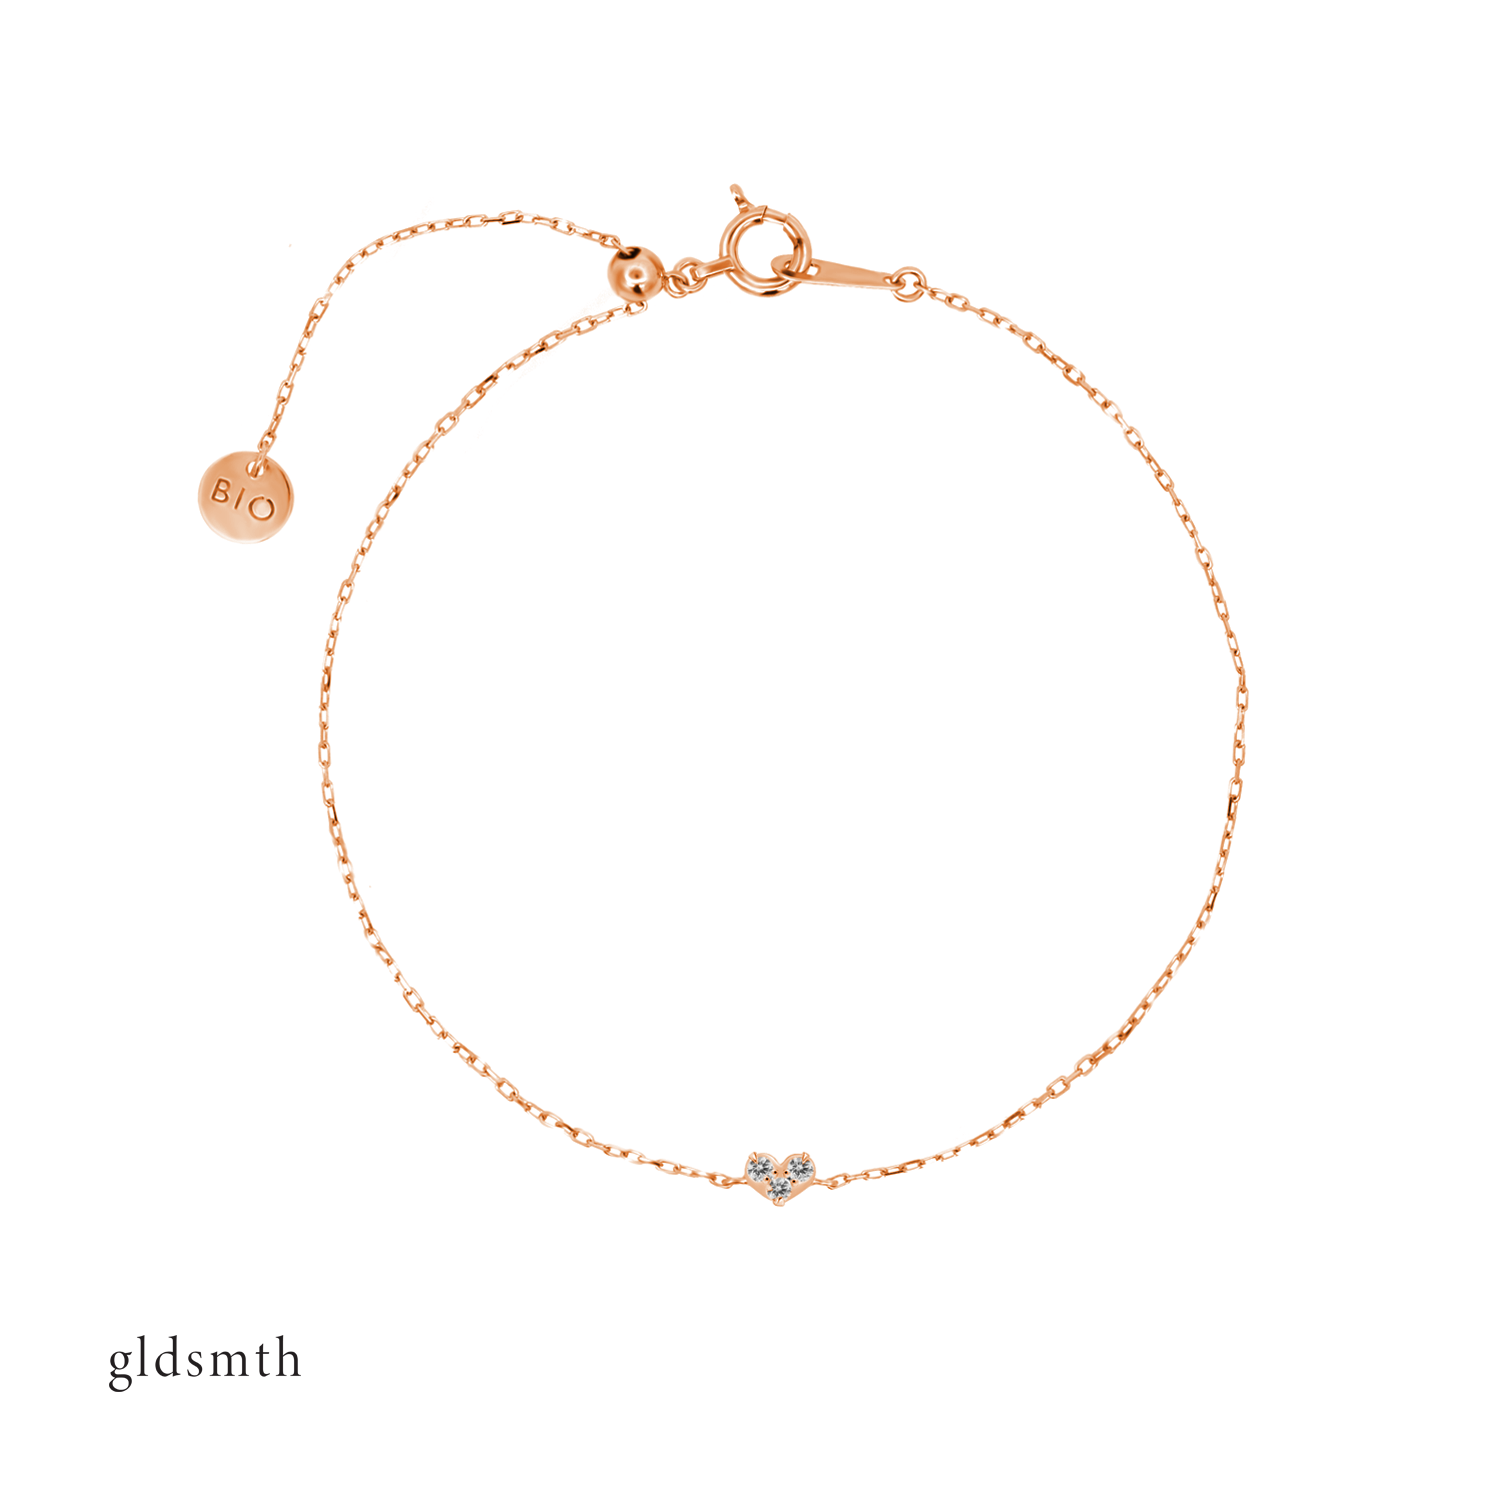 Stunning and fine handcrafted 10k solid rose gold bracelet with conflict-free diamonds.